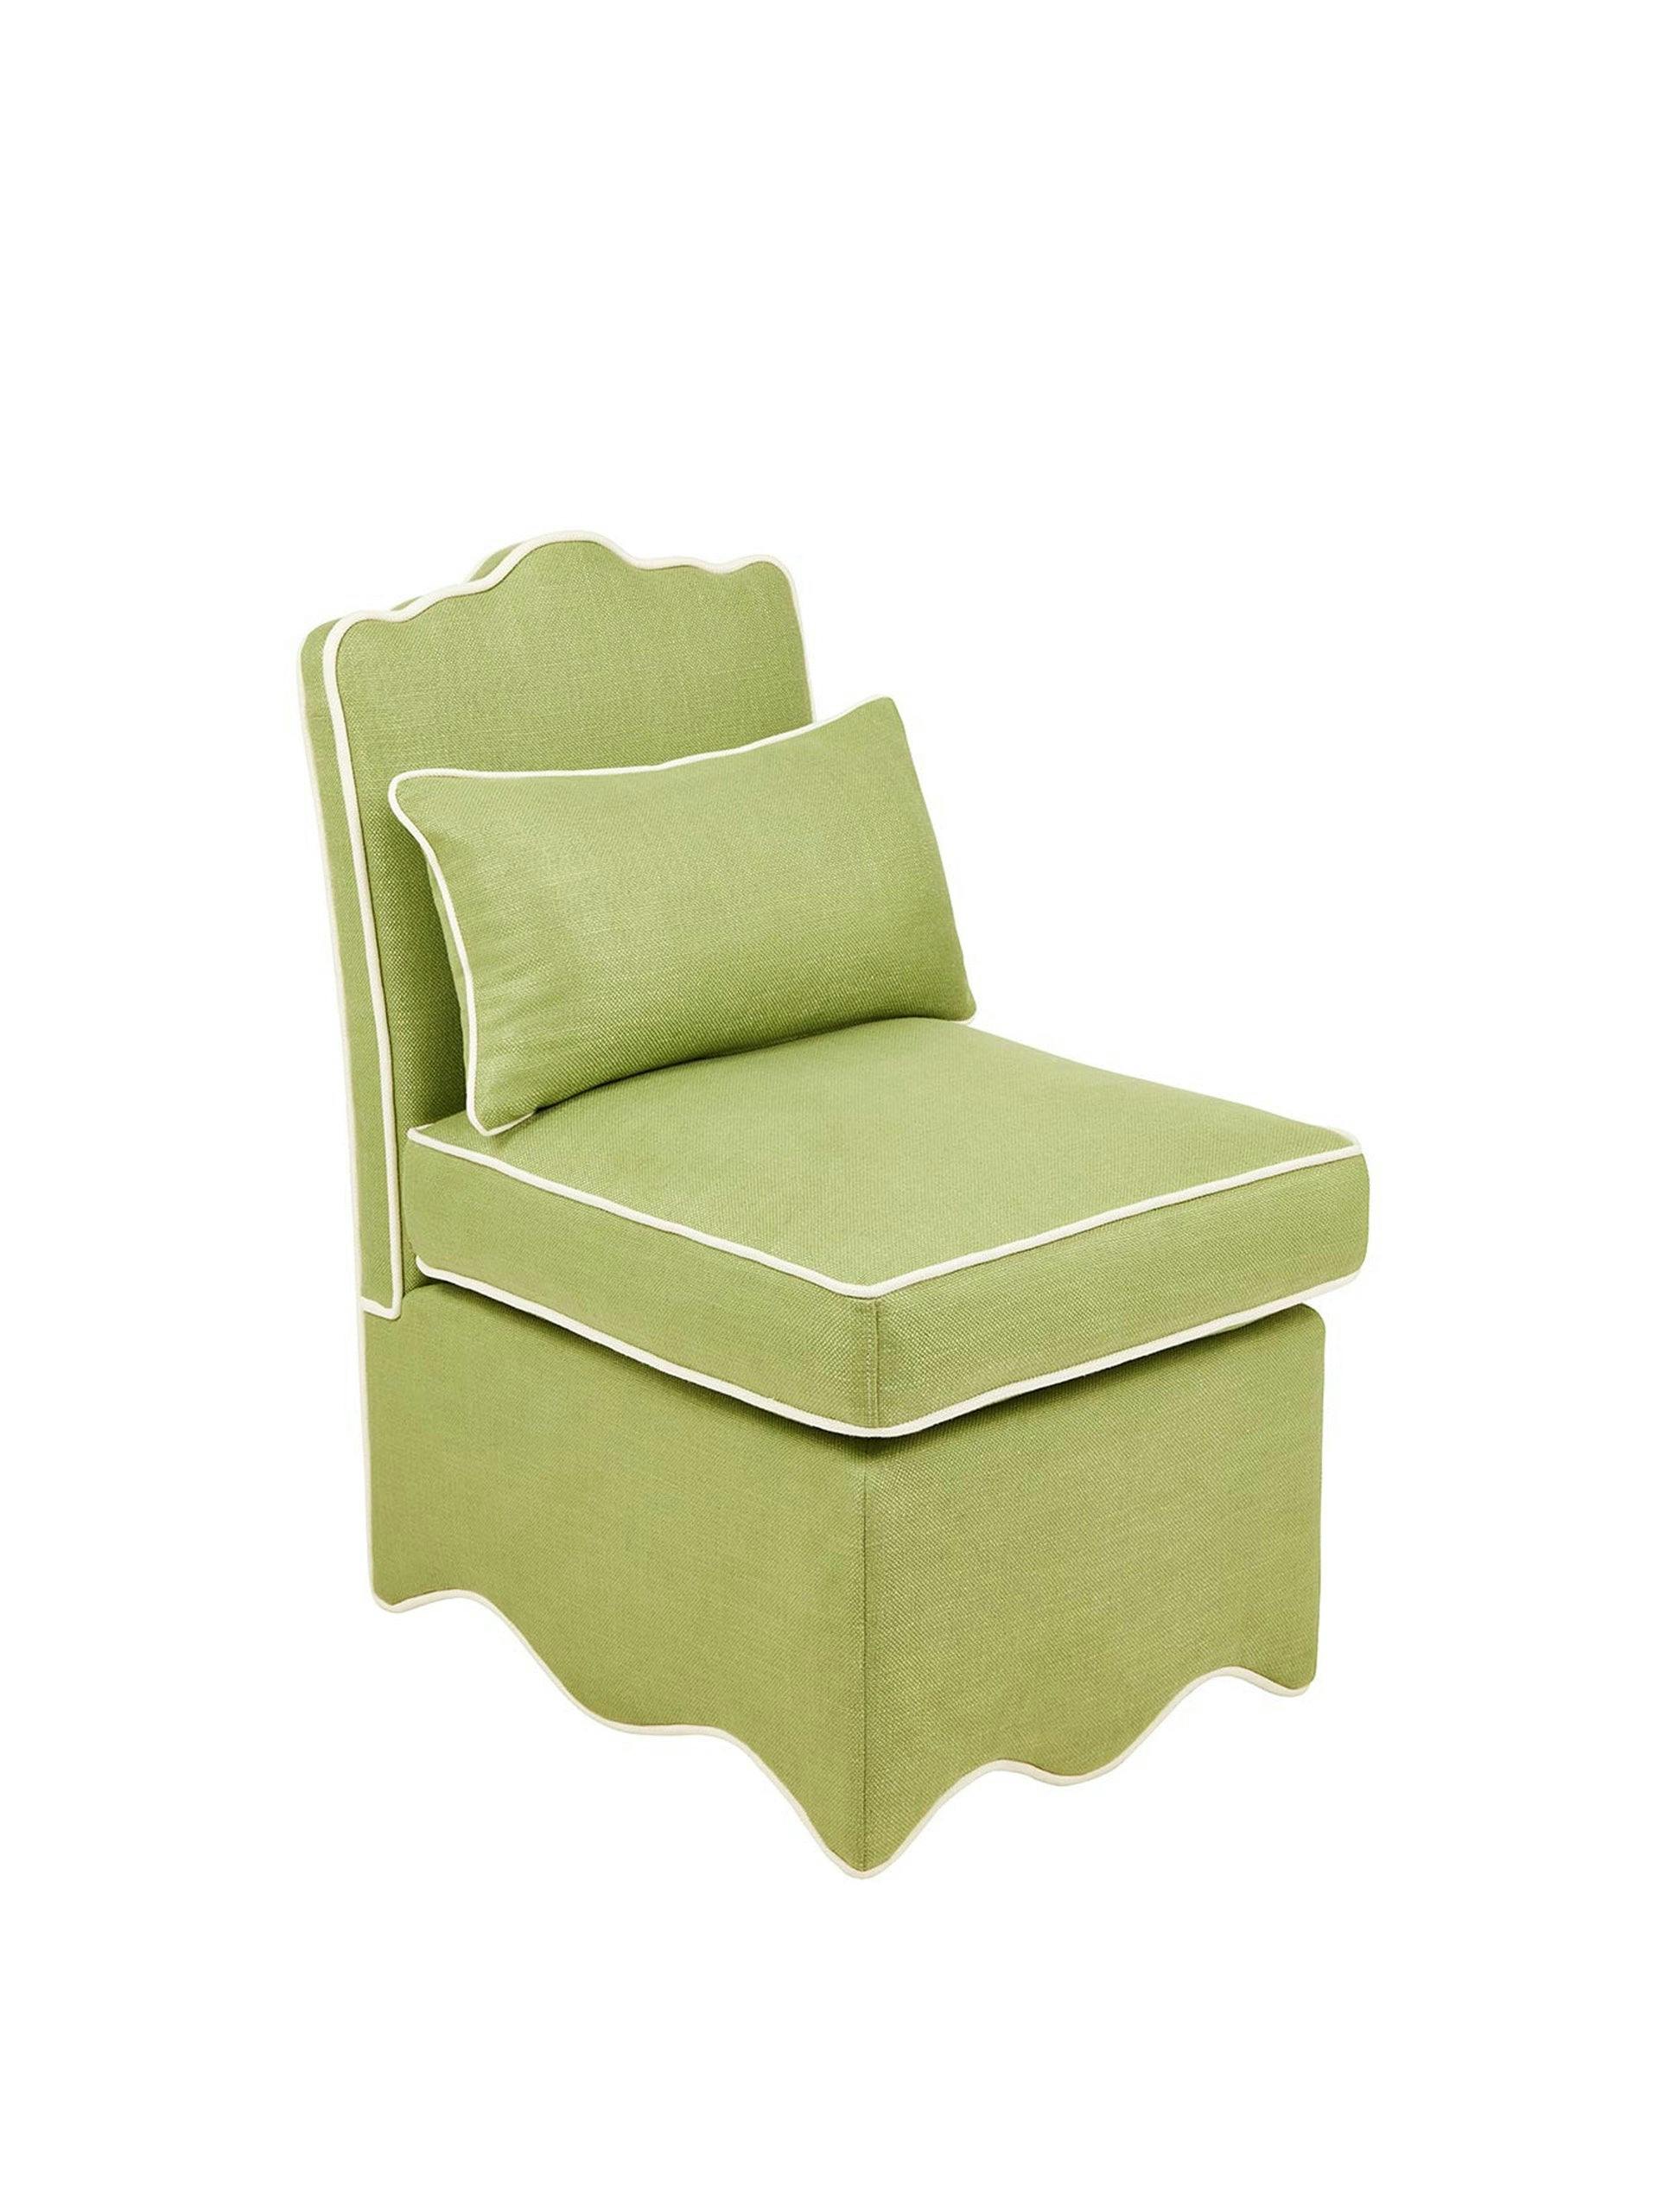 Scallop Upholstered Slipper chair